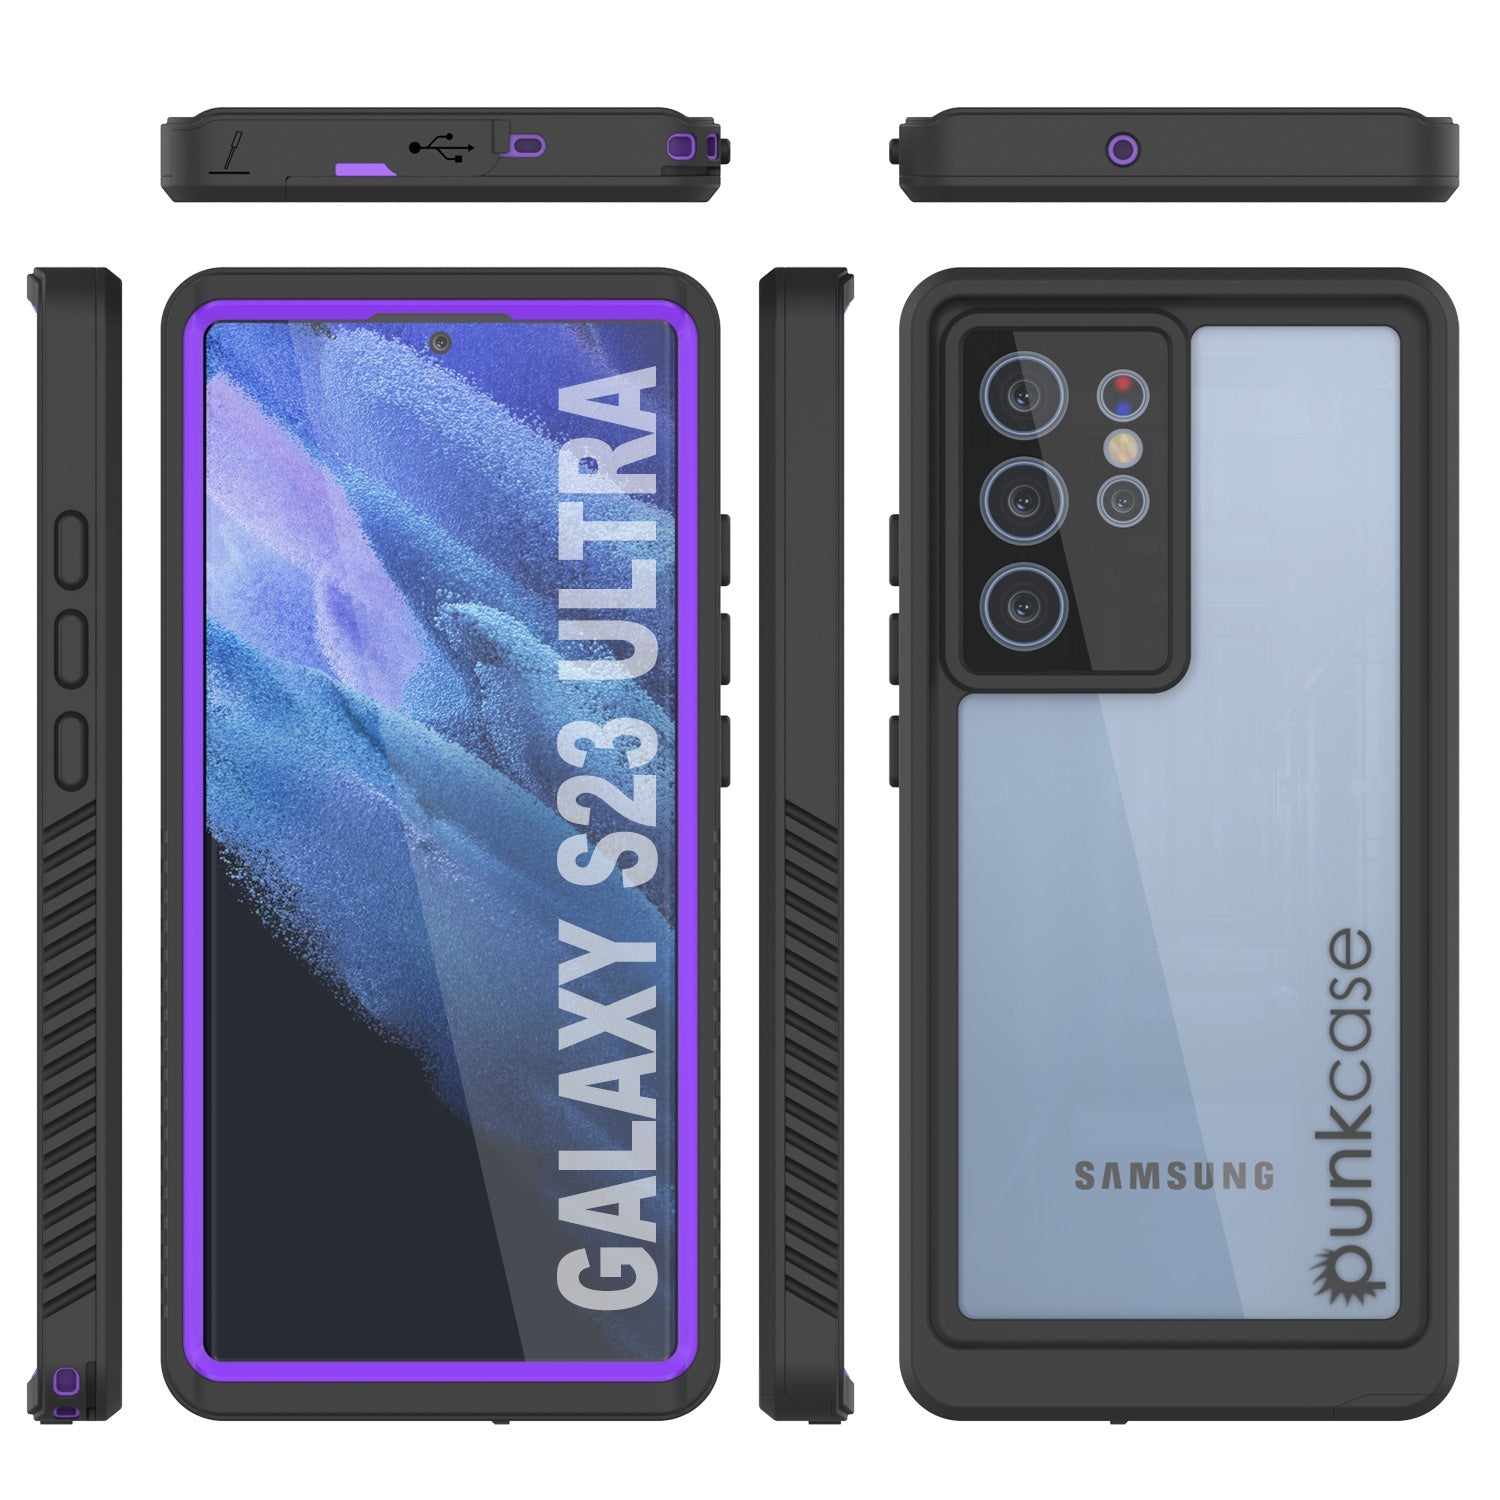 Galaxy S23 Ultra Water/ Shockproof [Extreme Series] Slim Screen Protector Case [Purple]